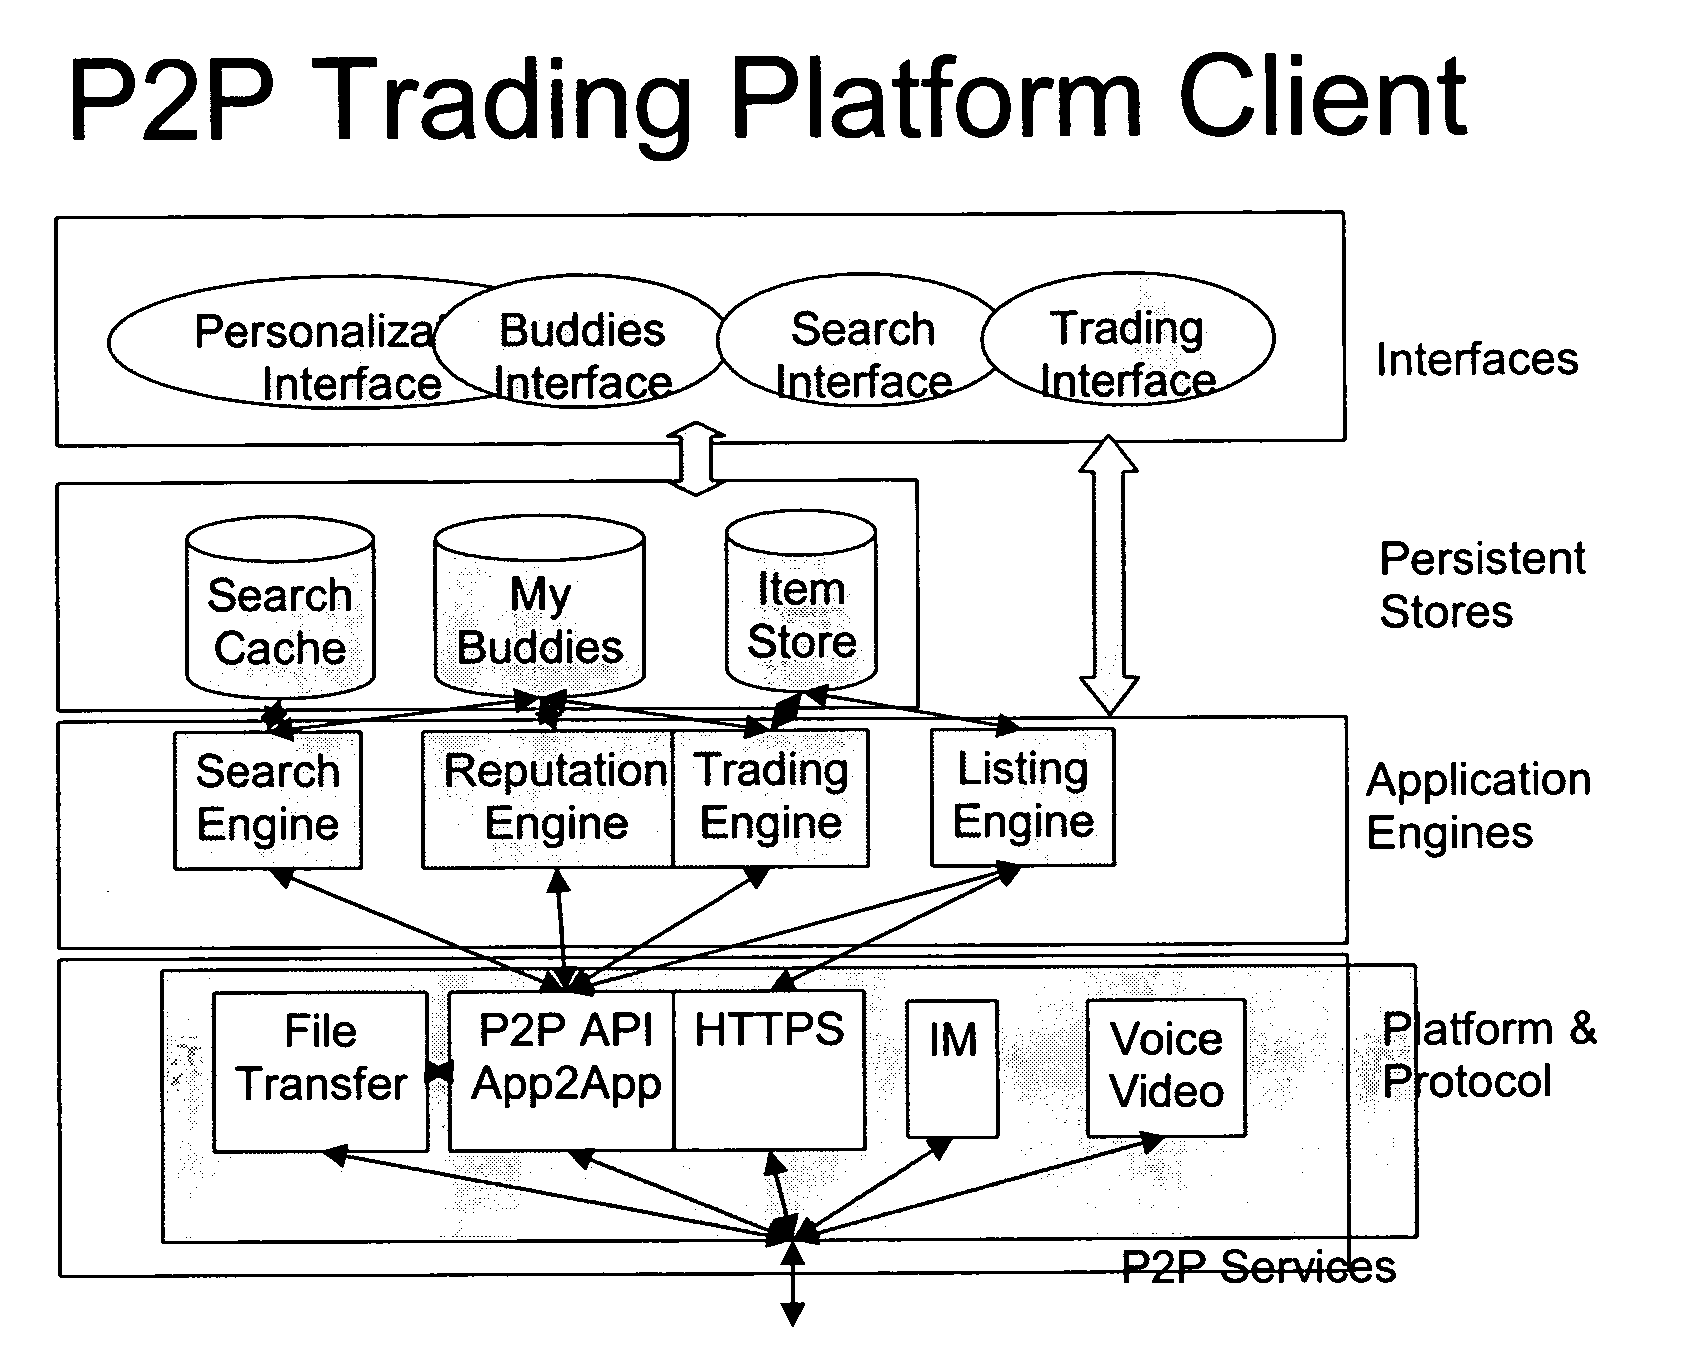 Peer-to-peer trading platform with roles-based transactions